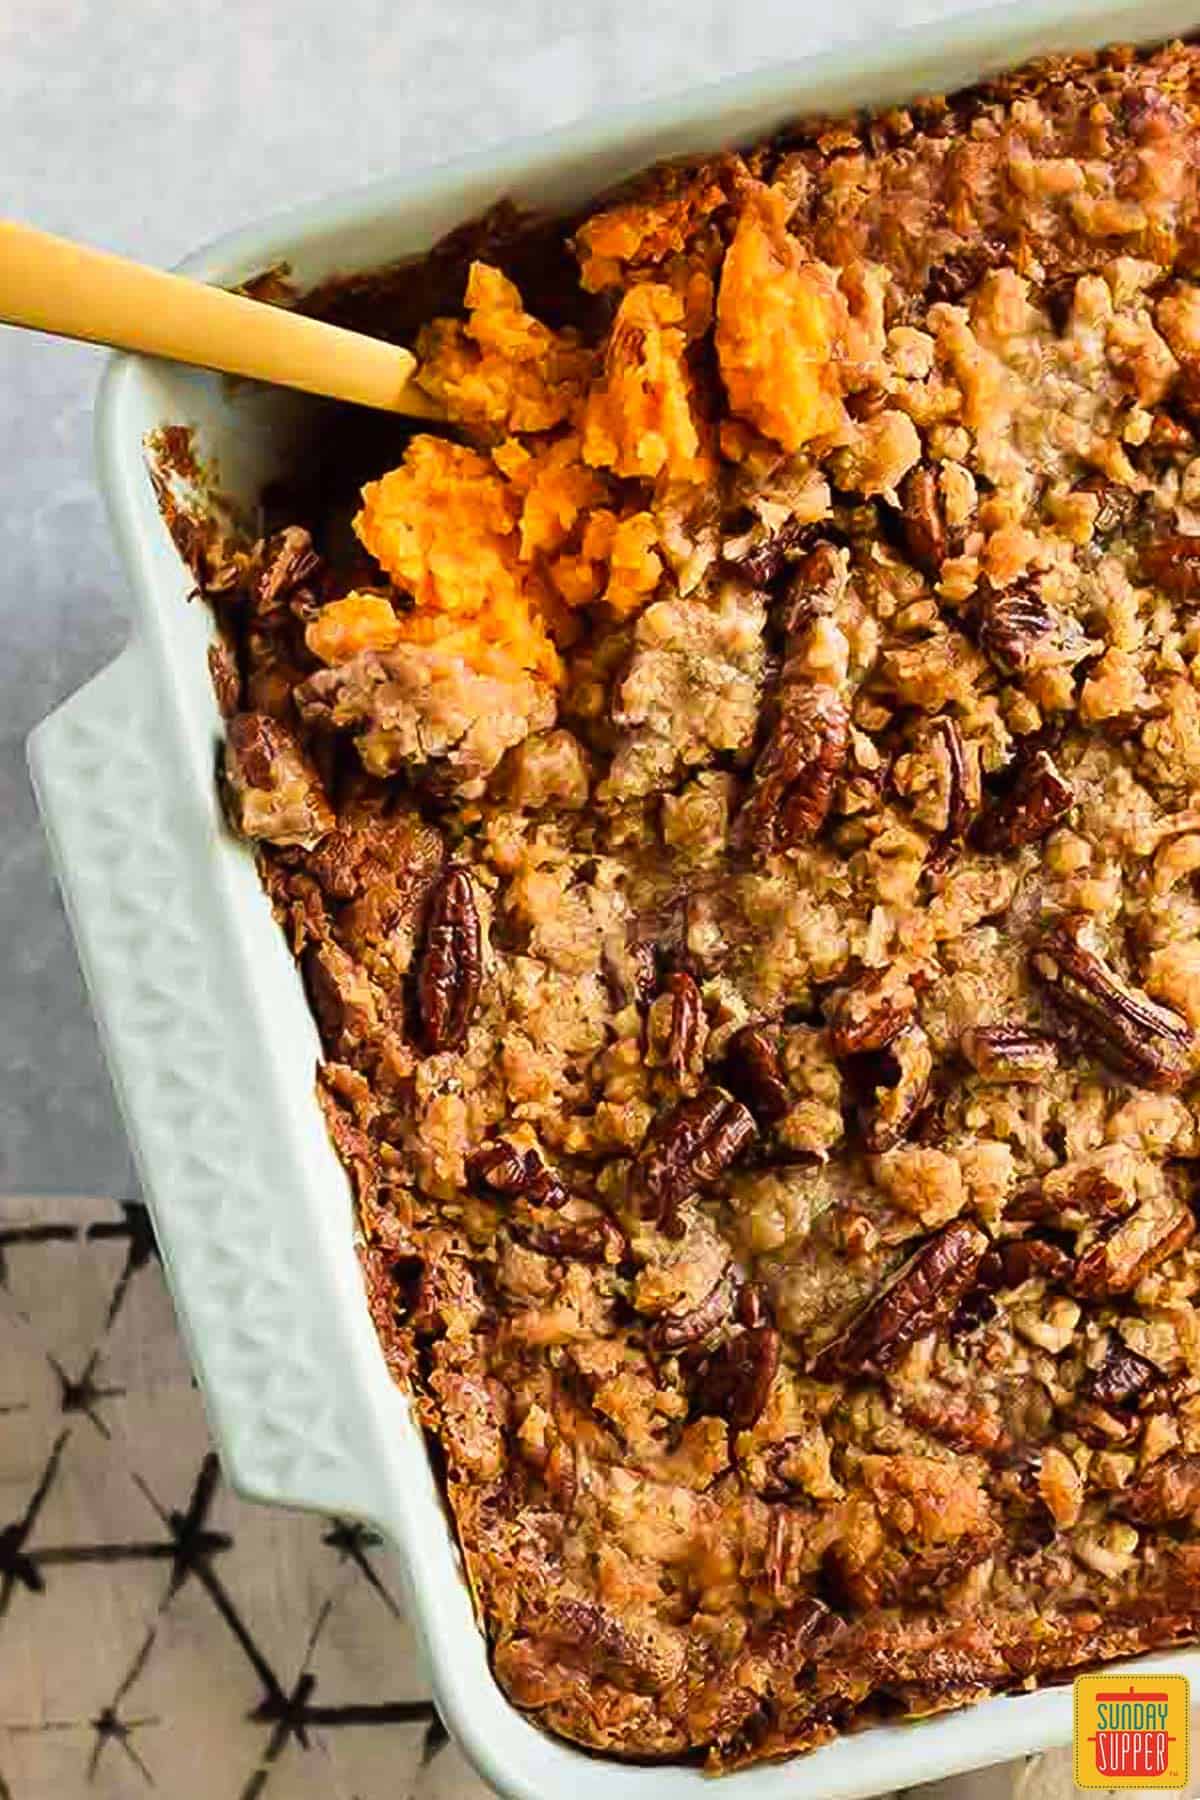 a spoon in a casserole dish of sweet potato casserole covered in pecans